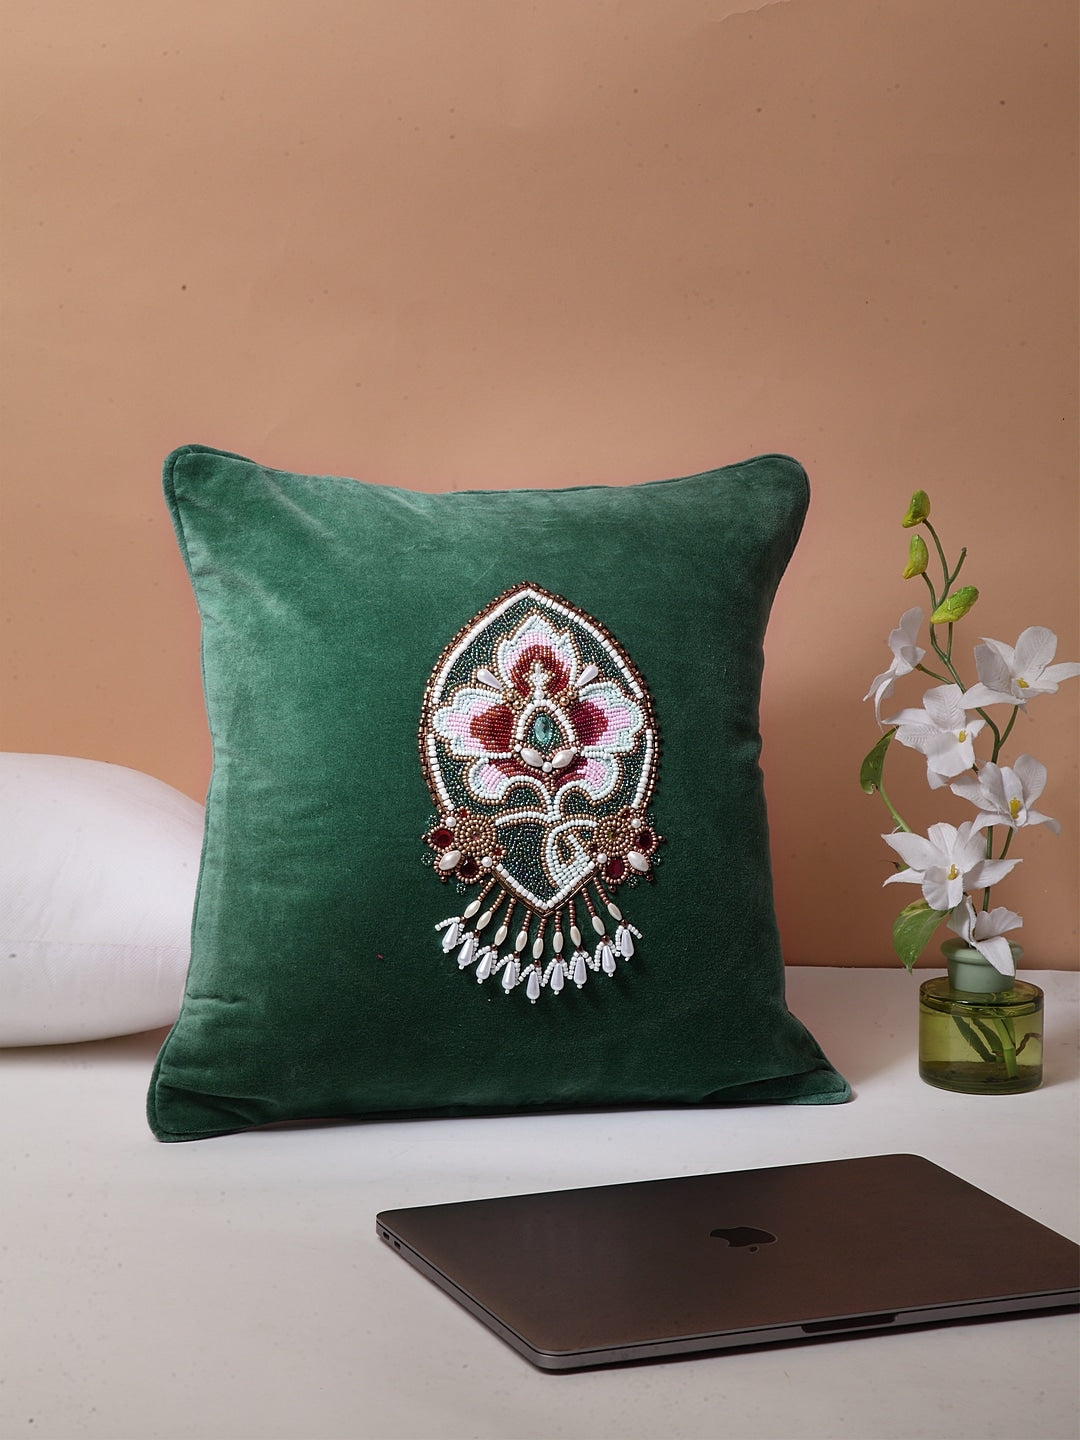 Chandelier Embroidered Cushion Cover